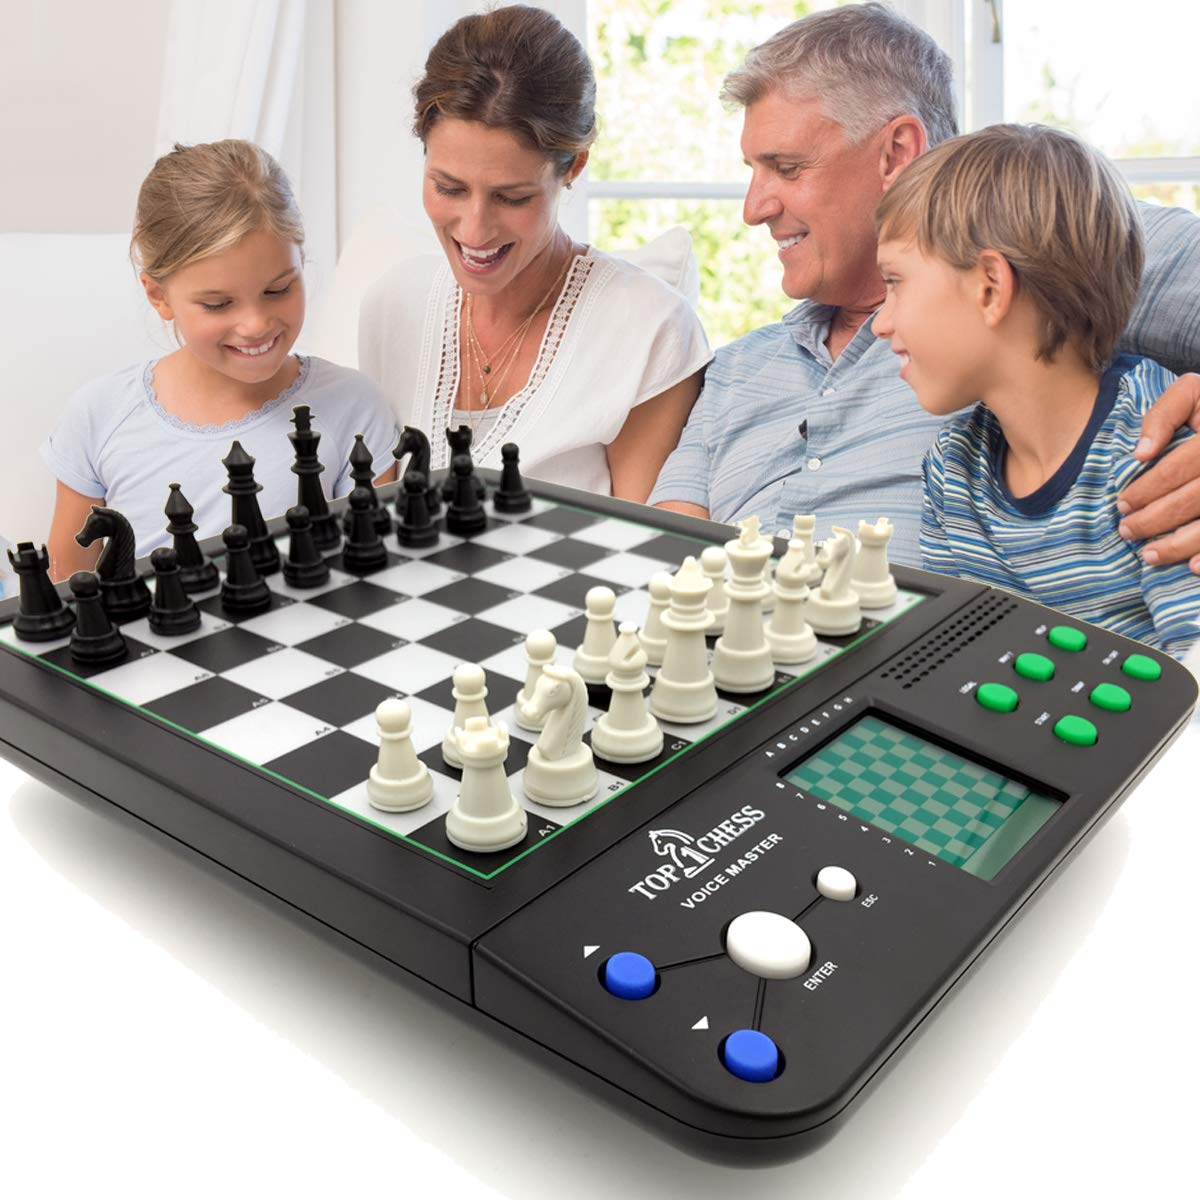 Top 1 Chess Set Board Game, Electronic Voice Chess Academy